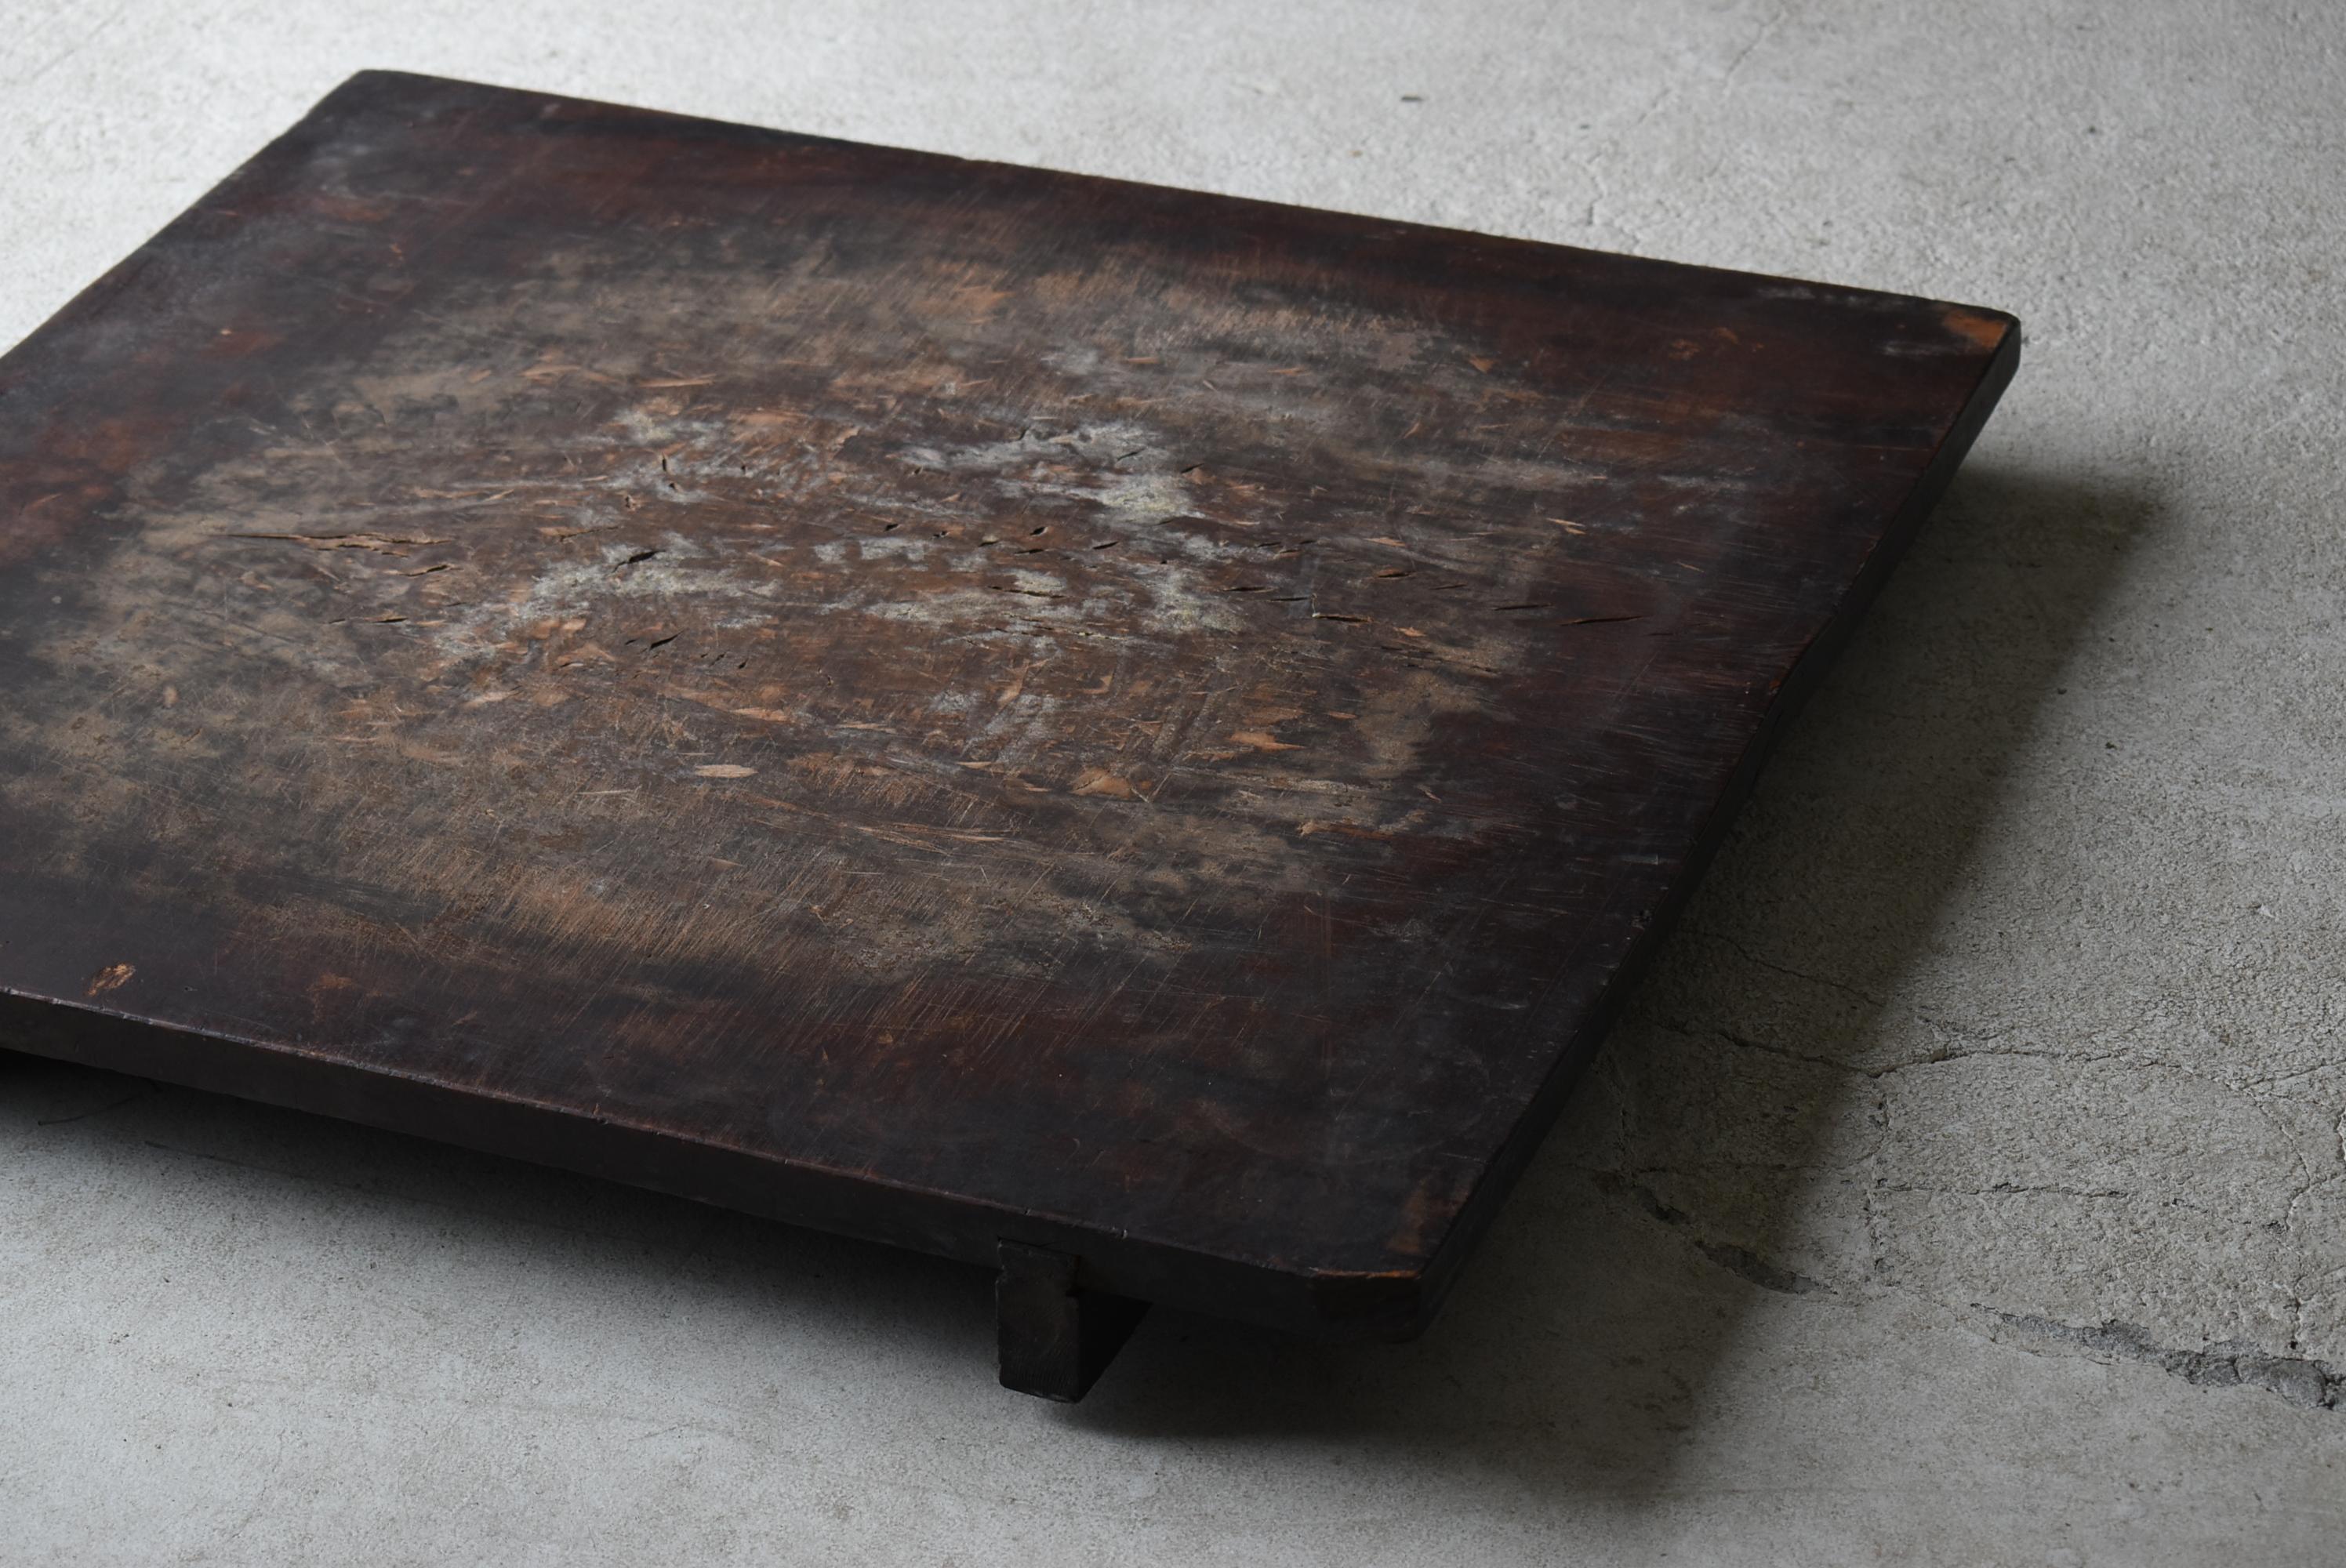 Japanese Antique Wooden Board 1860s-1900s / Abstract Art Low Table Wabi Sabi 2